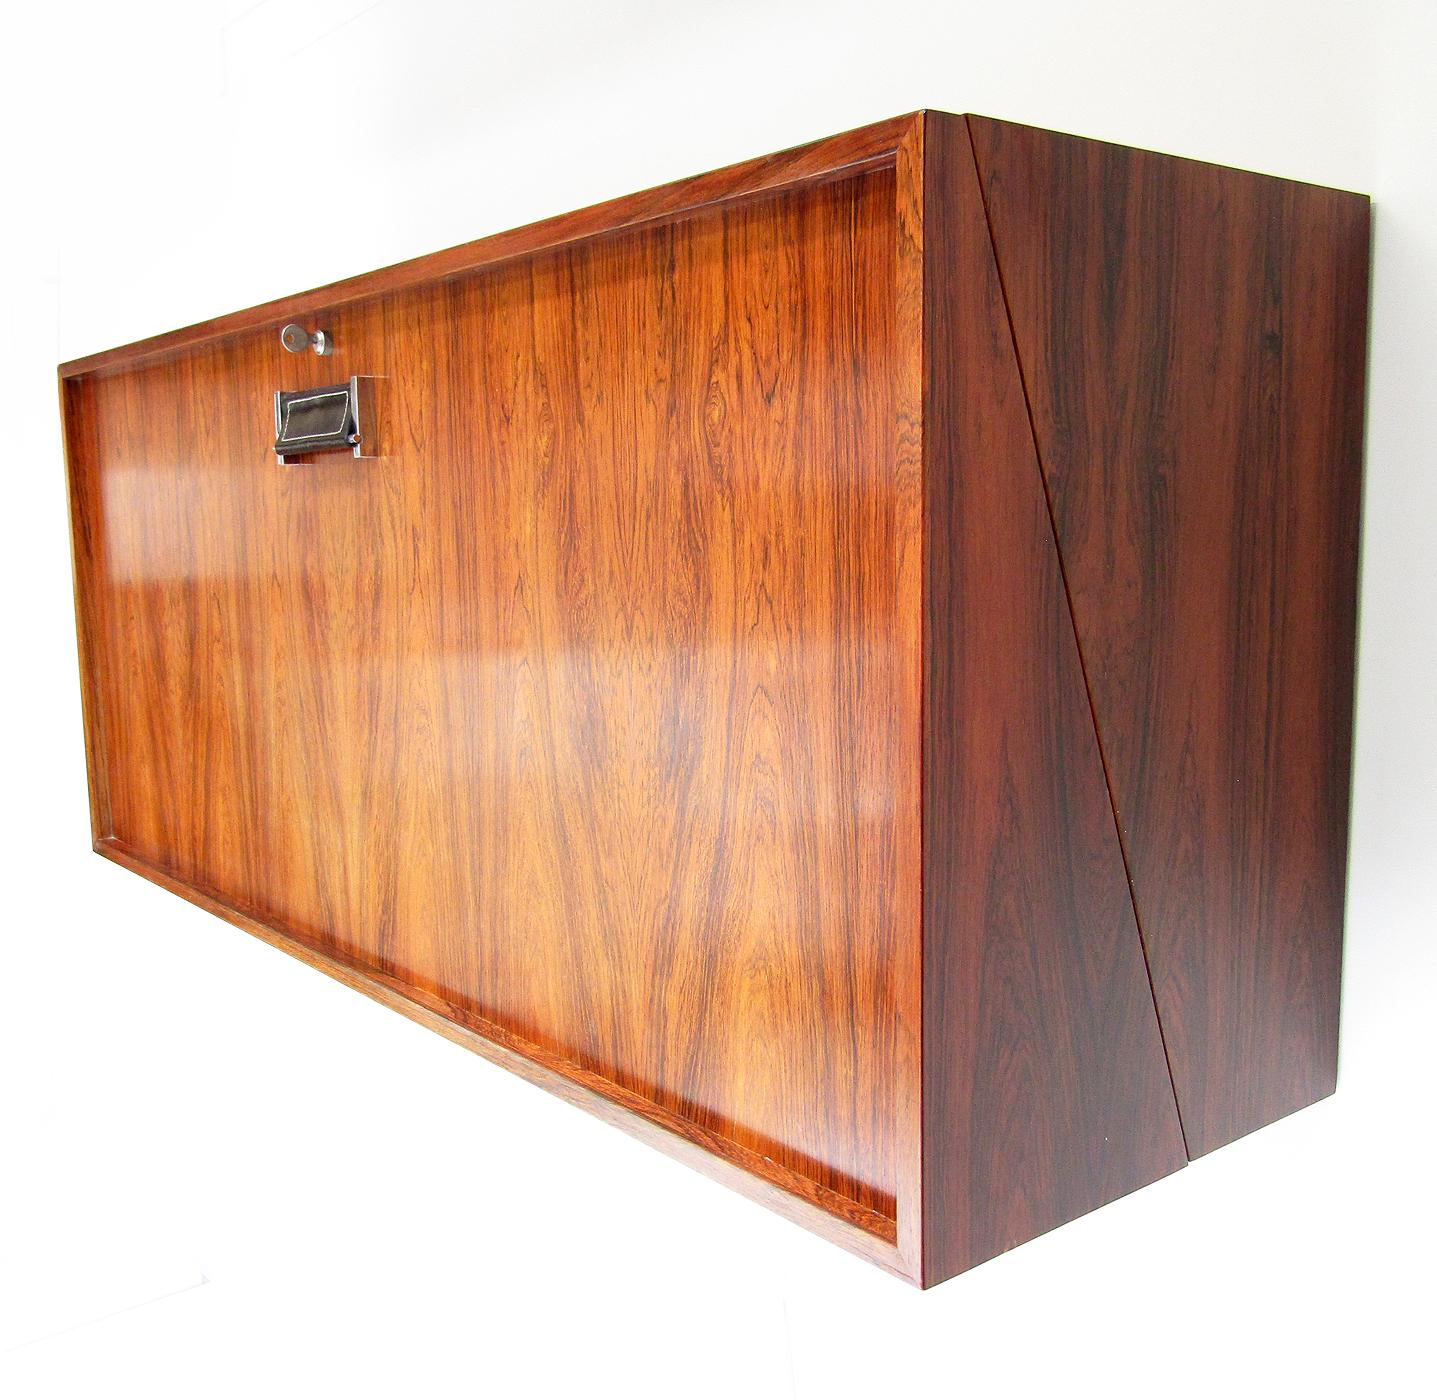 1960s, Danish Roswood Wall-Mounted Bar / Desk by Erik Buch for Dyrlund For Sale 5